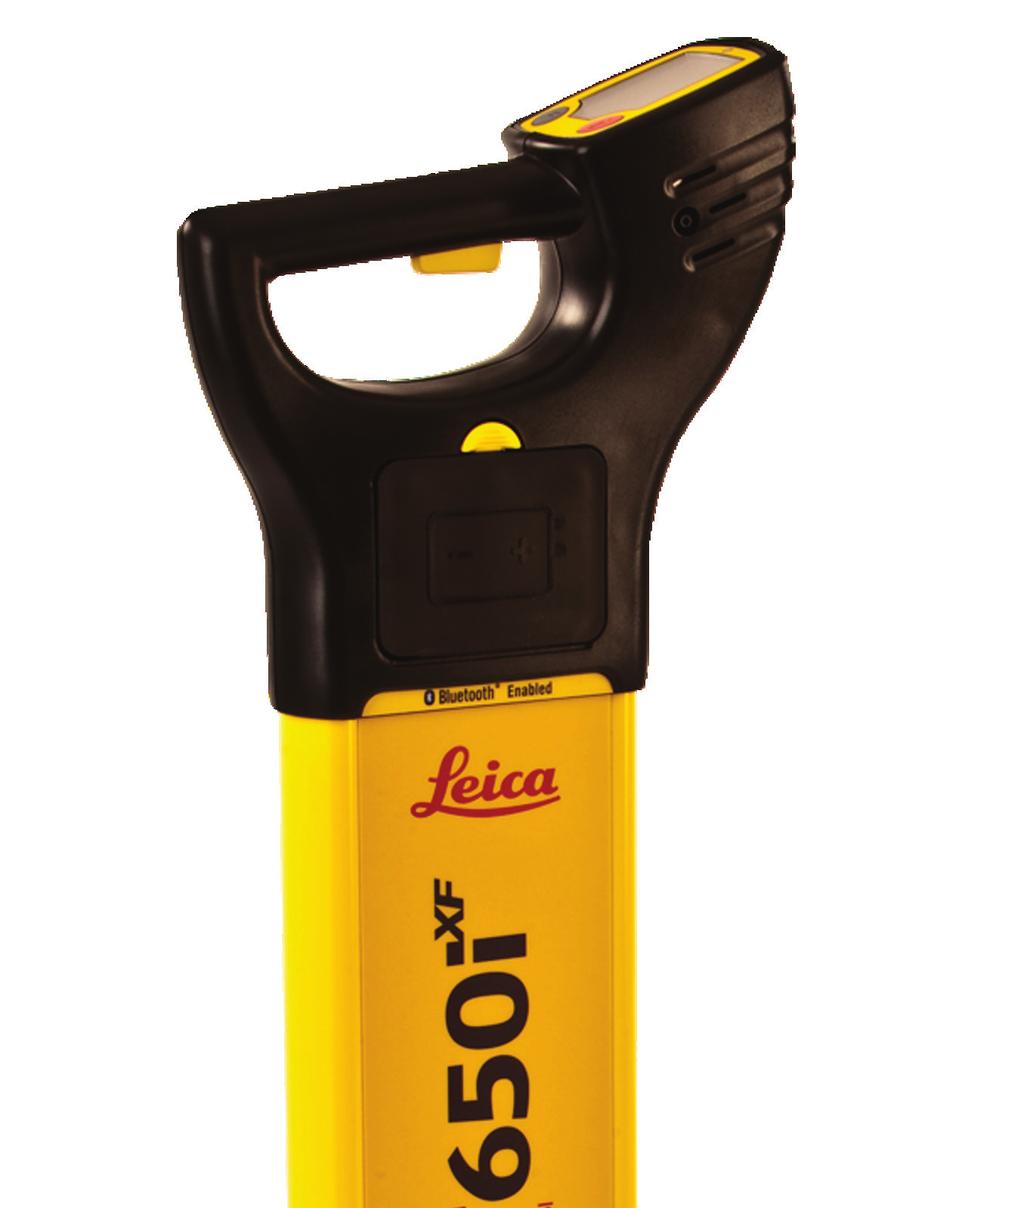 Leica Digisystem xf-series Making cable avoidance easier & safer Every year site workers are injured due to inadvertently striking buried utilities such as electricity cables or pipes.